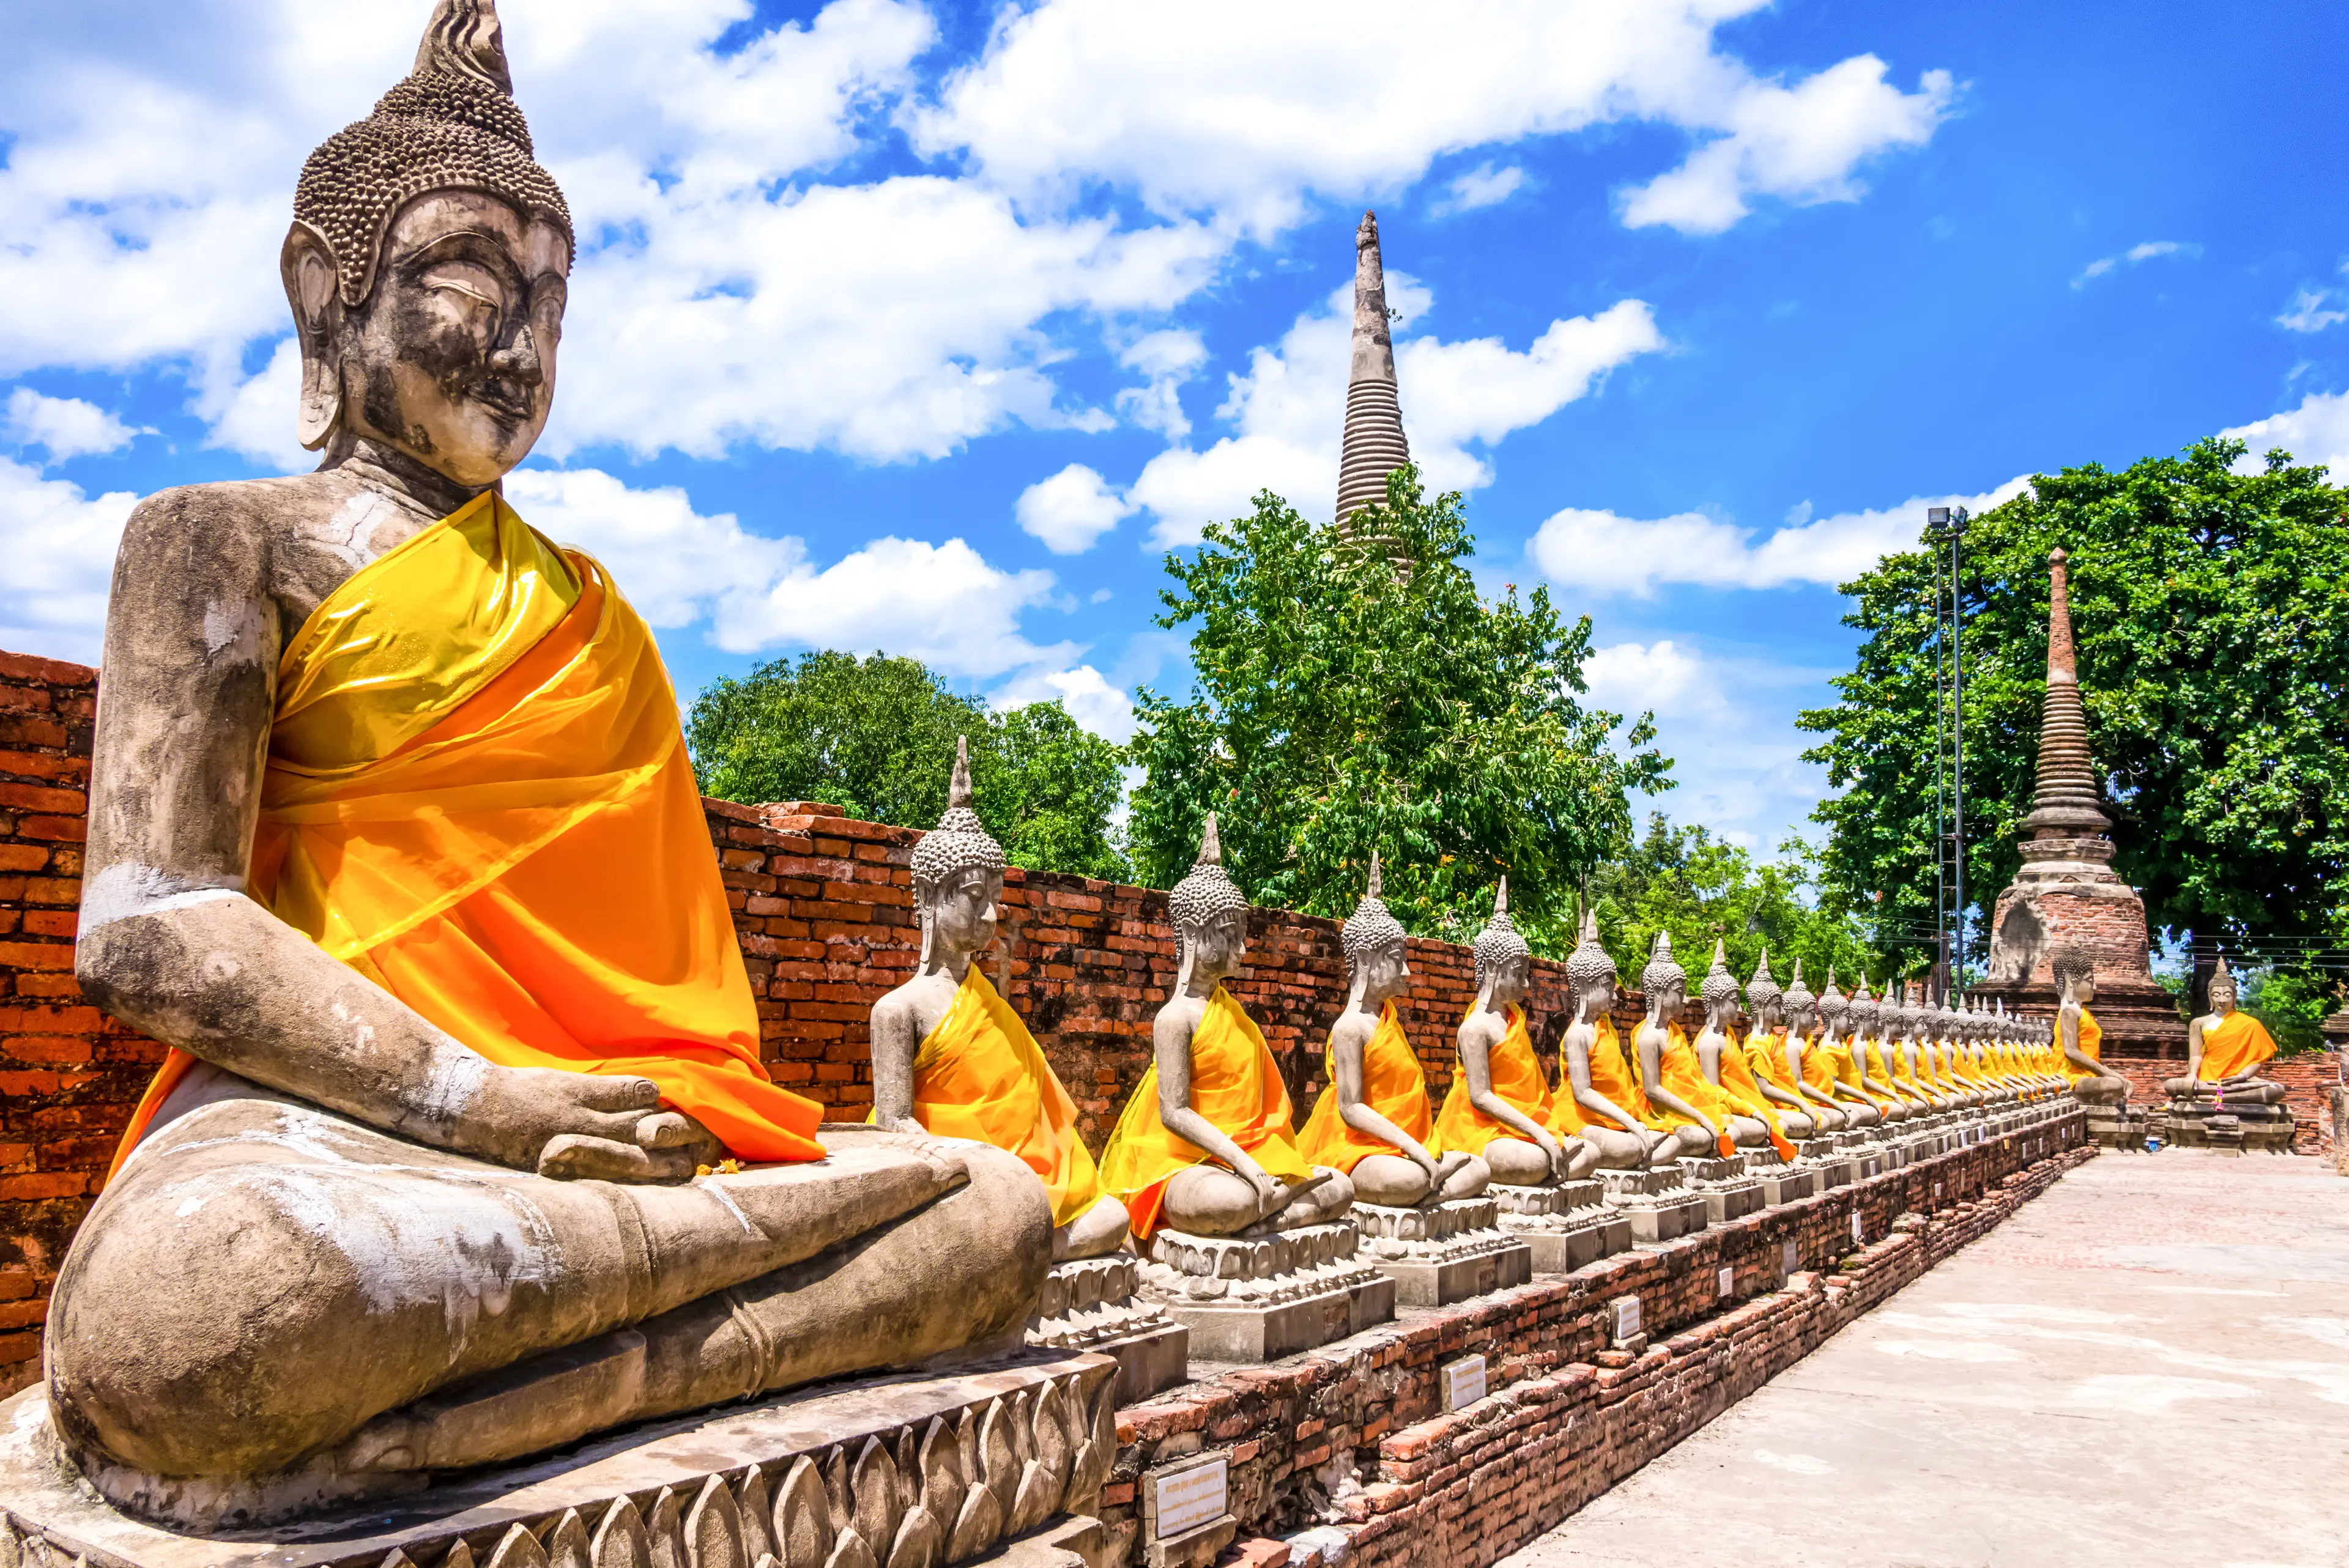 Thrilling Ayutthaya: Day Full Adventure & Nightlife with Friends